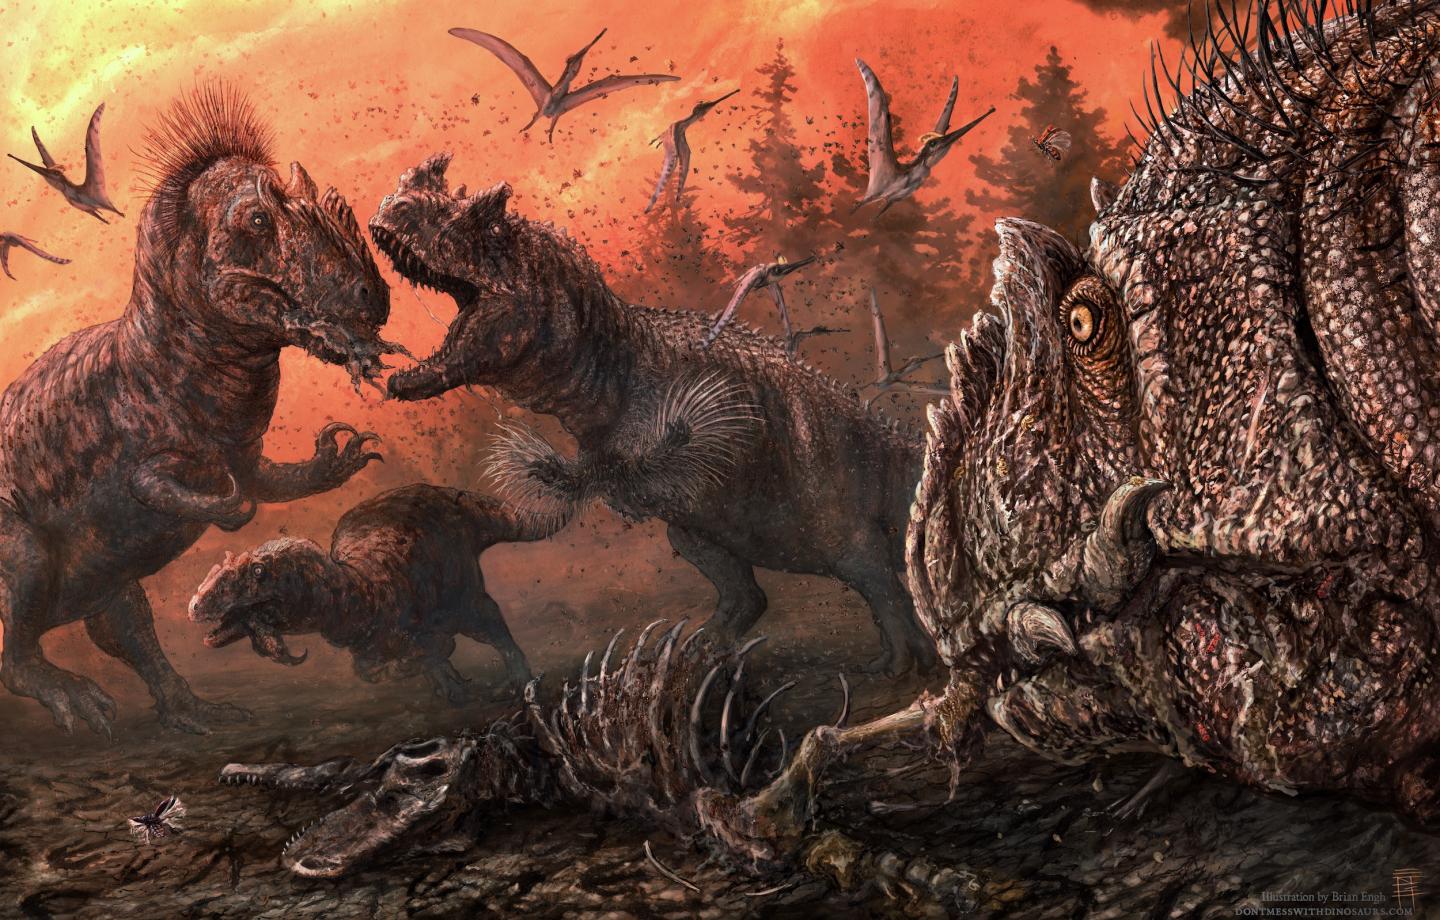 In Stressed Ecosystems Jurassic Dinosaurs Turned to Scavenging, Maybe even Cannibalism